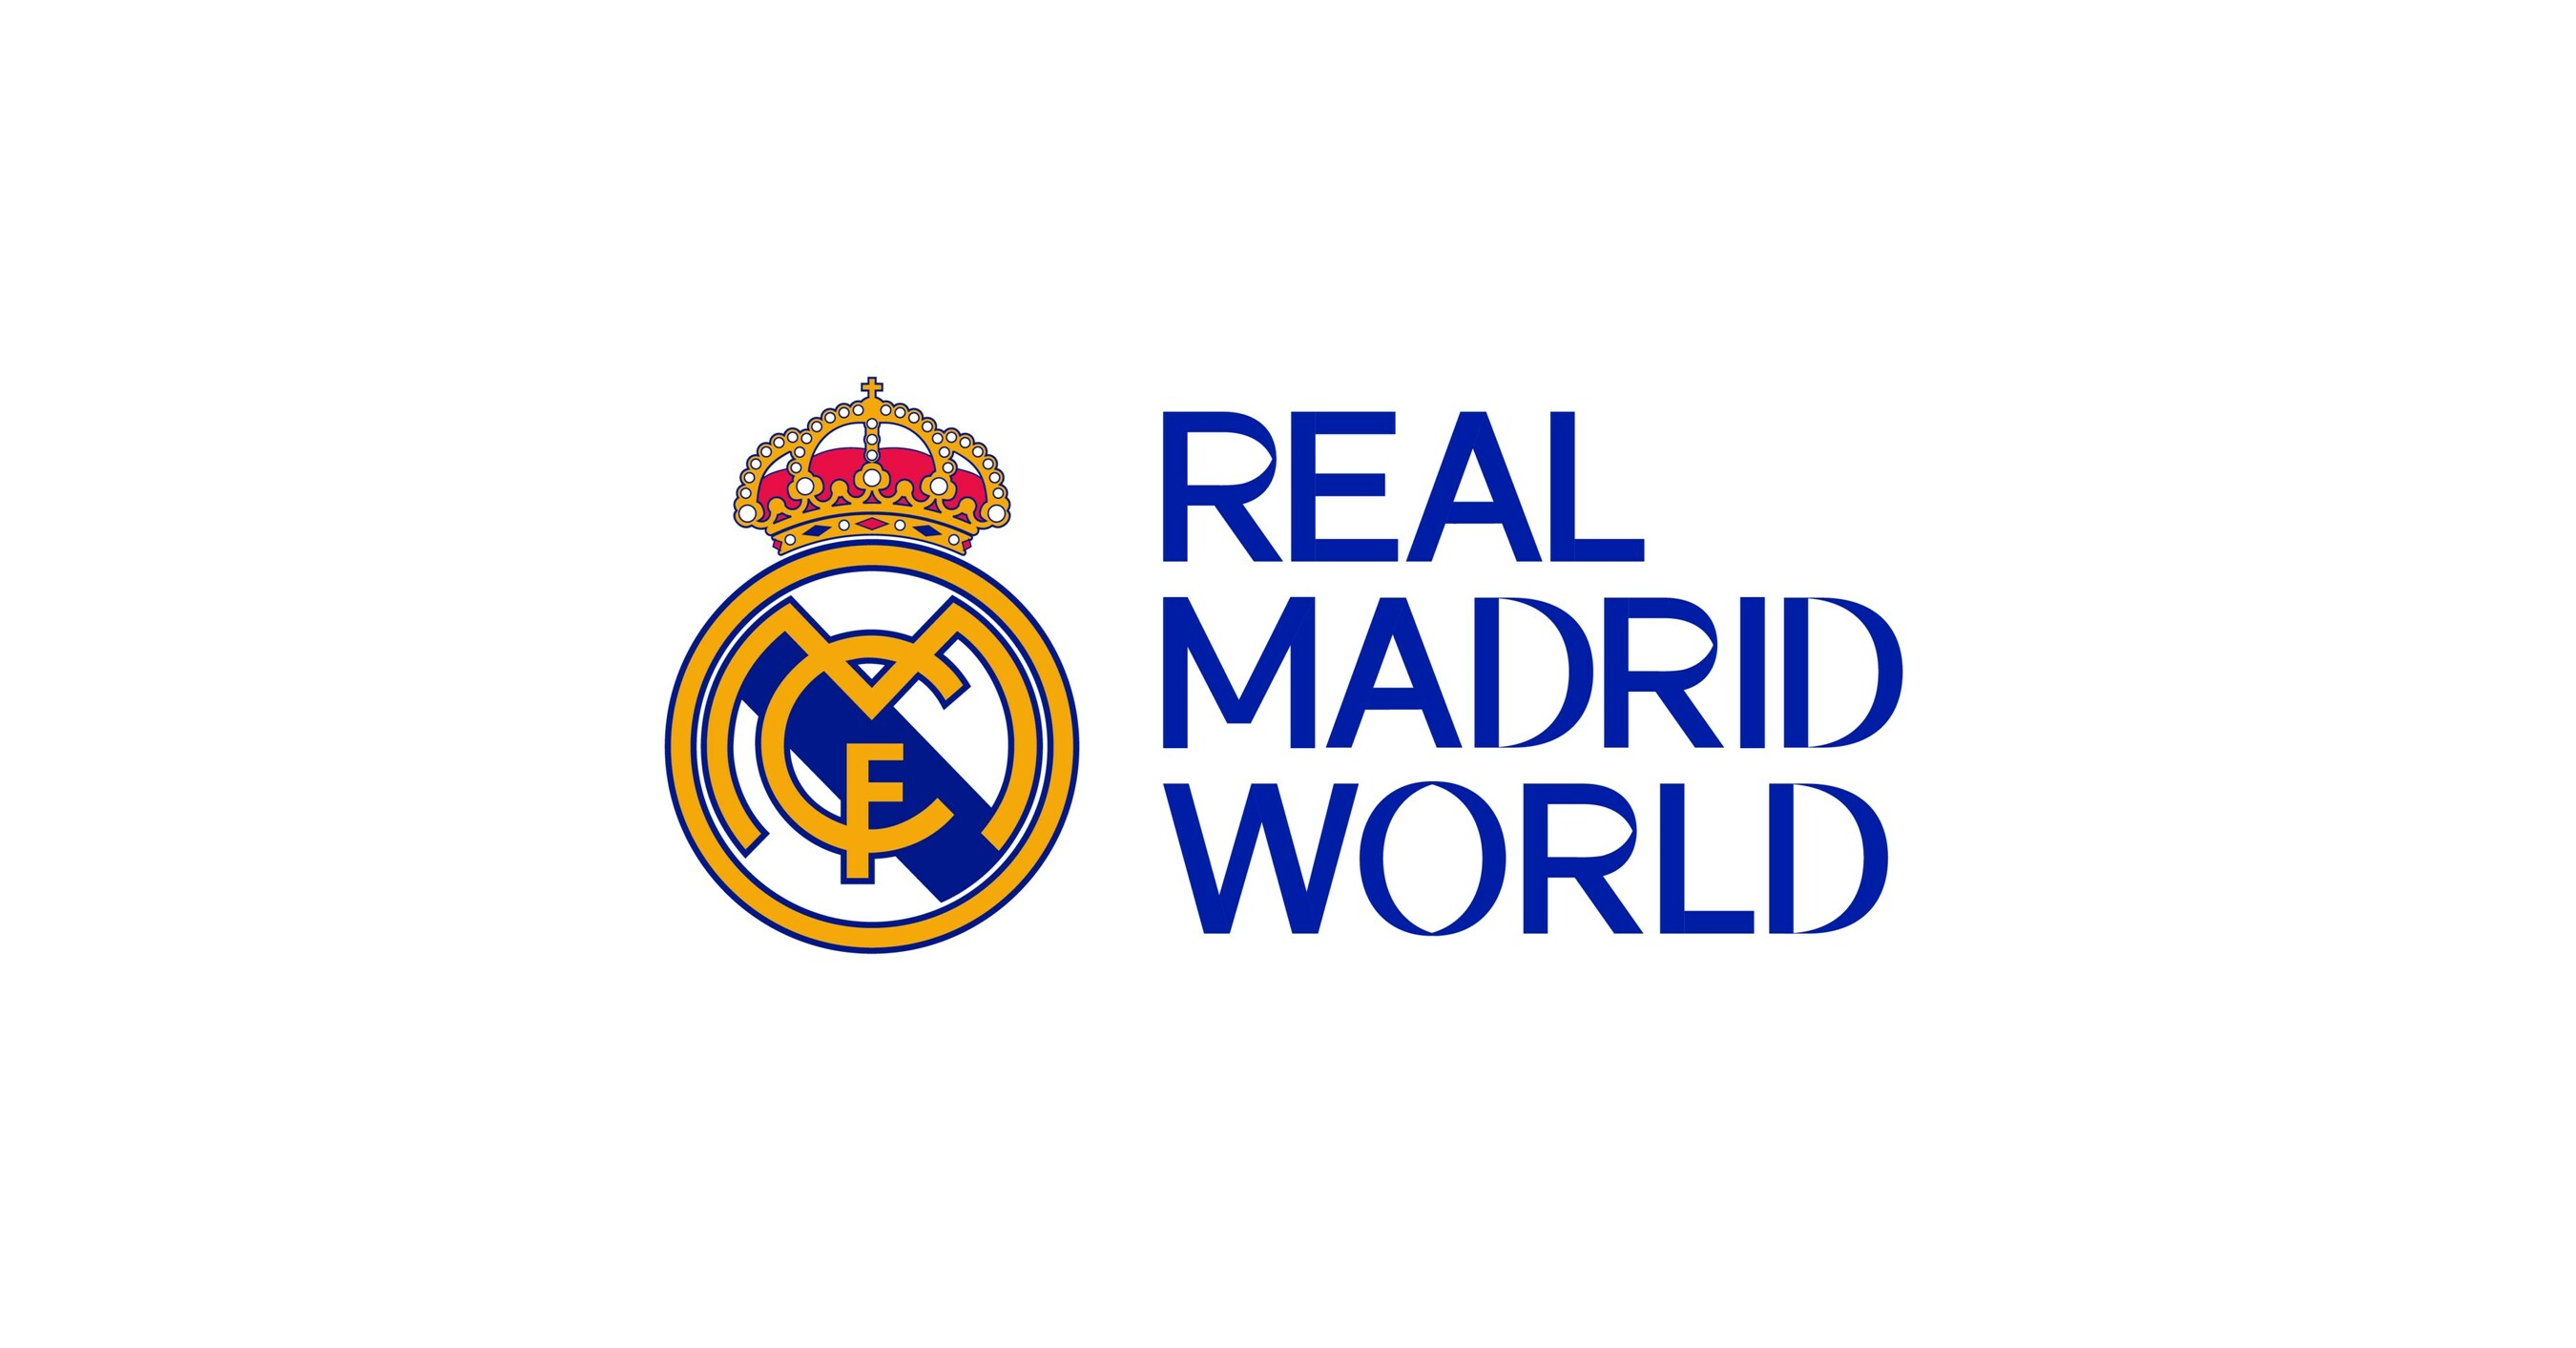 Dubai Parks™ and Resorts and Real Madrid C.F. announce Real Madrid